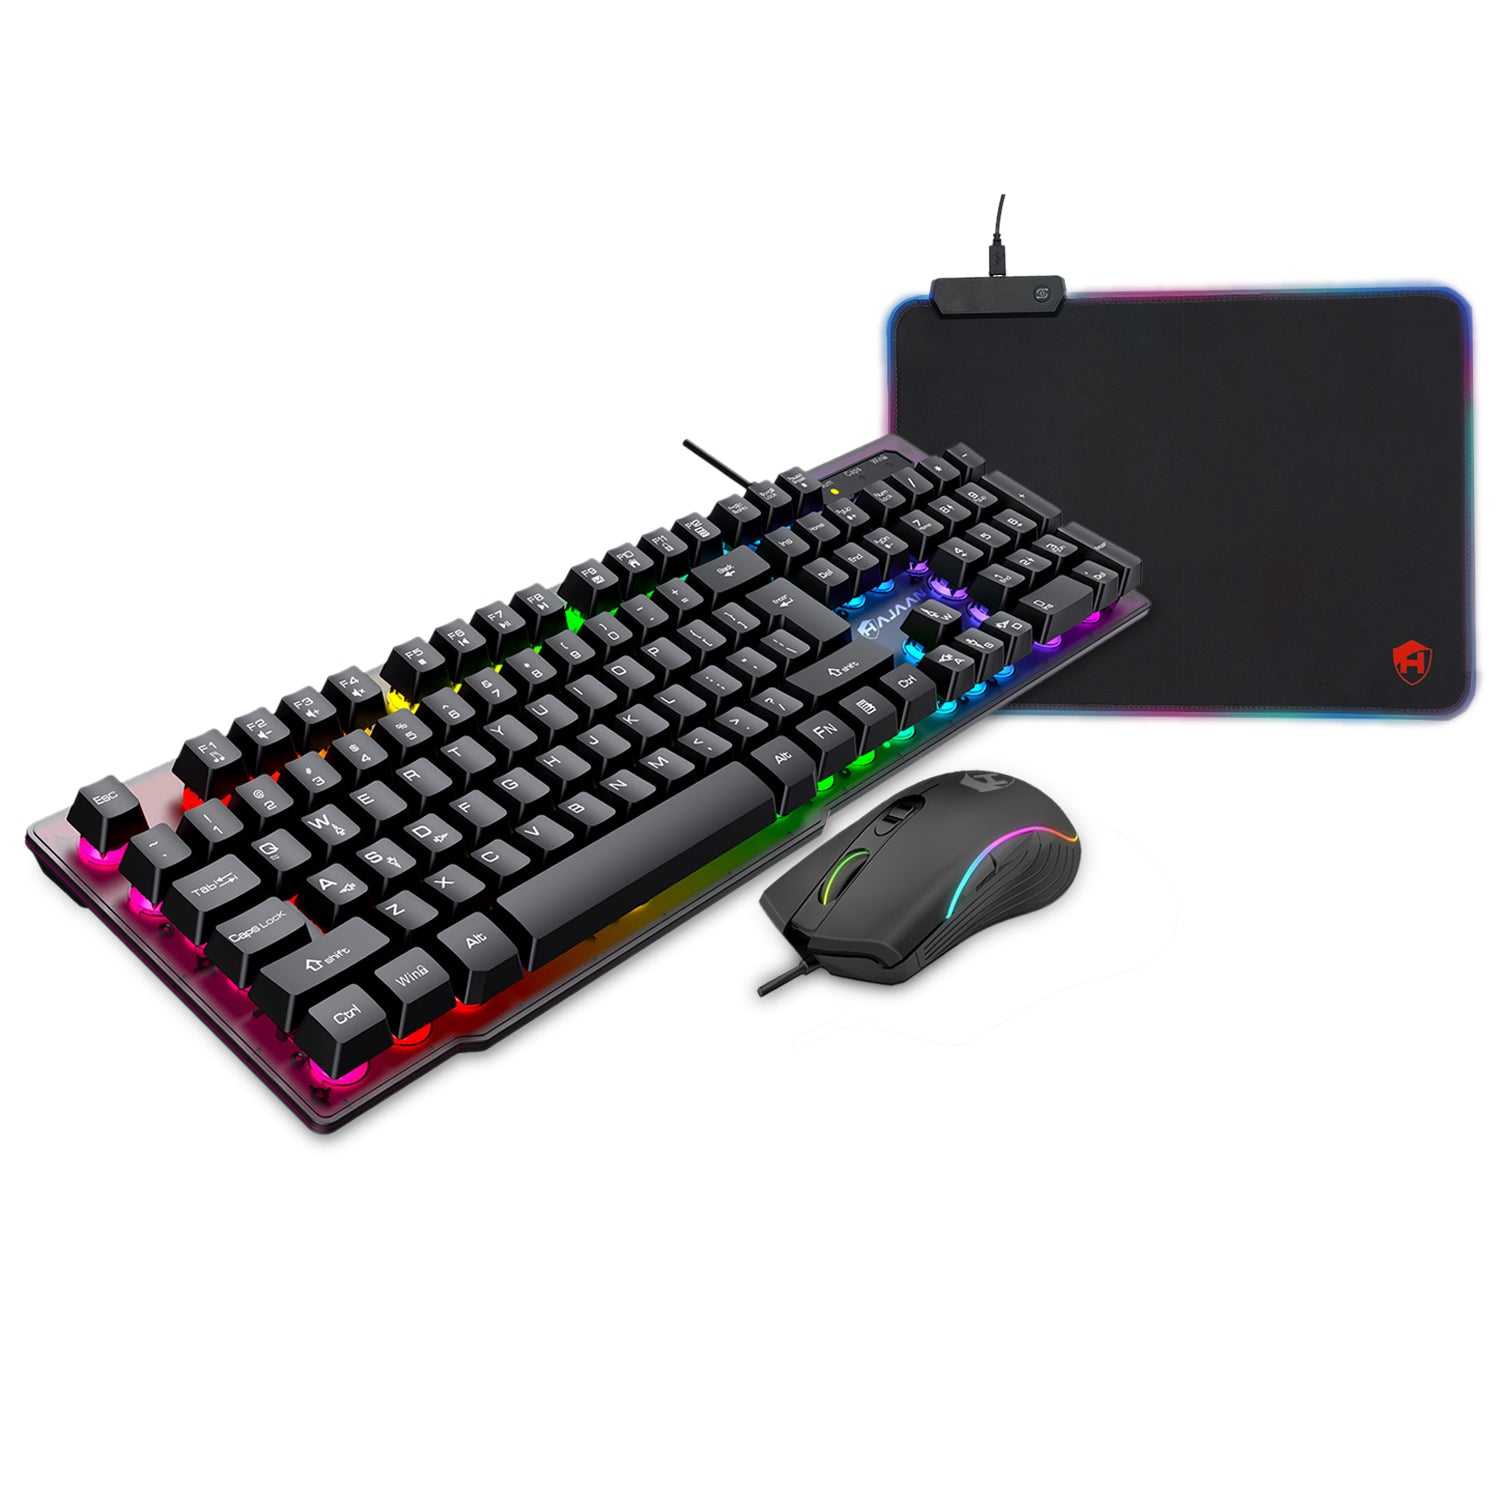 HAJAAN H410-G Wired RGB Gaming Keyboard and Mouse, Gaming Mouse Pad Combo with Multimedia and Anti-Ghosting Capability Keys- Gamer Bundle for Windows PC – (Black)